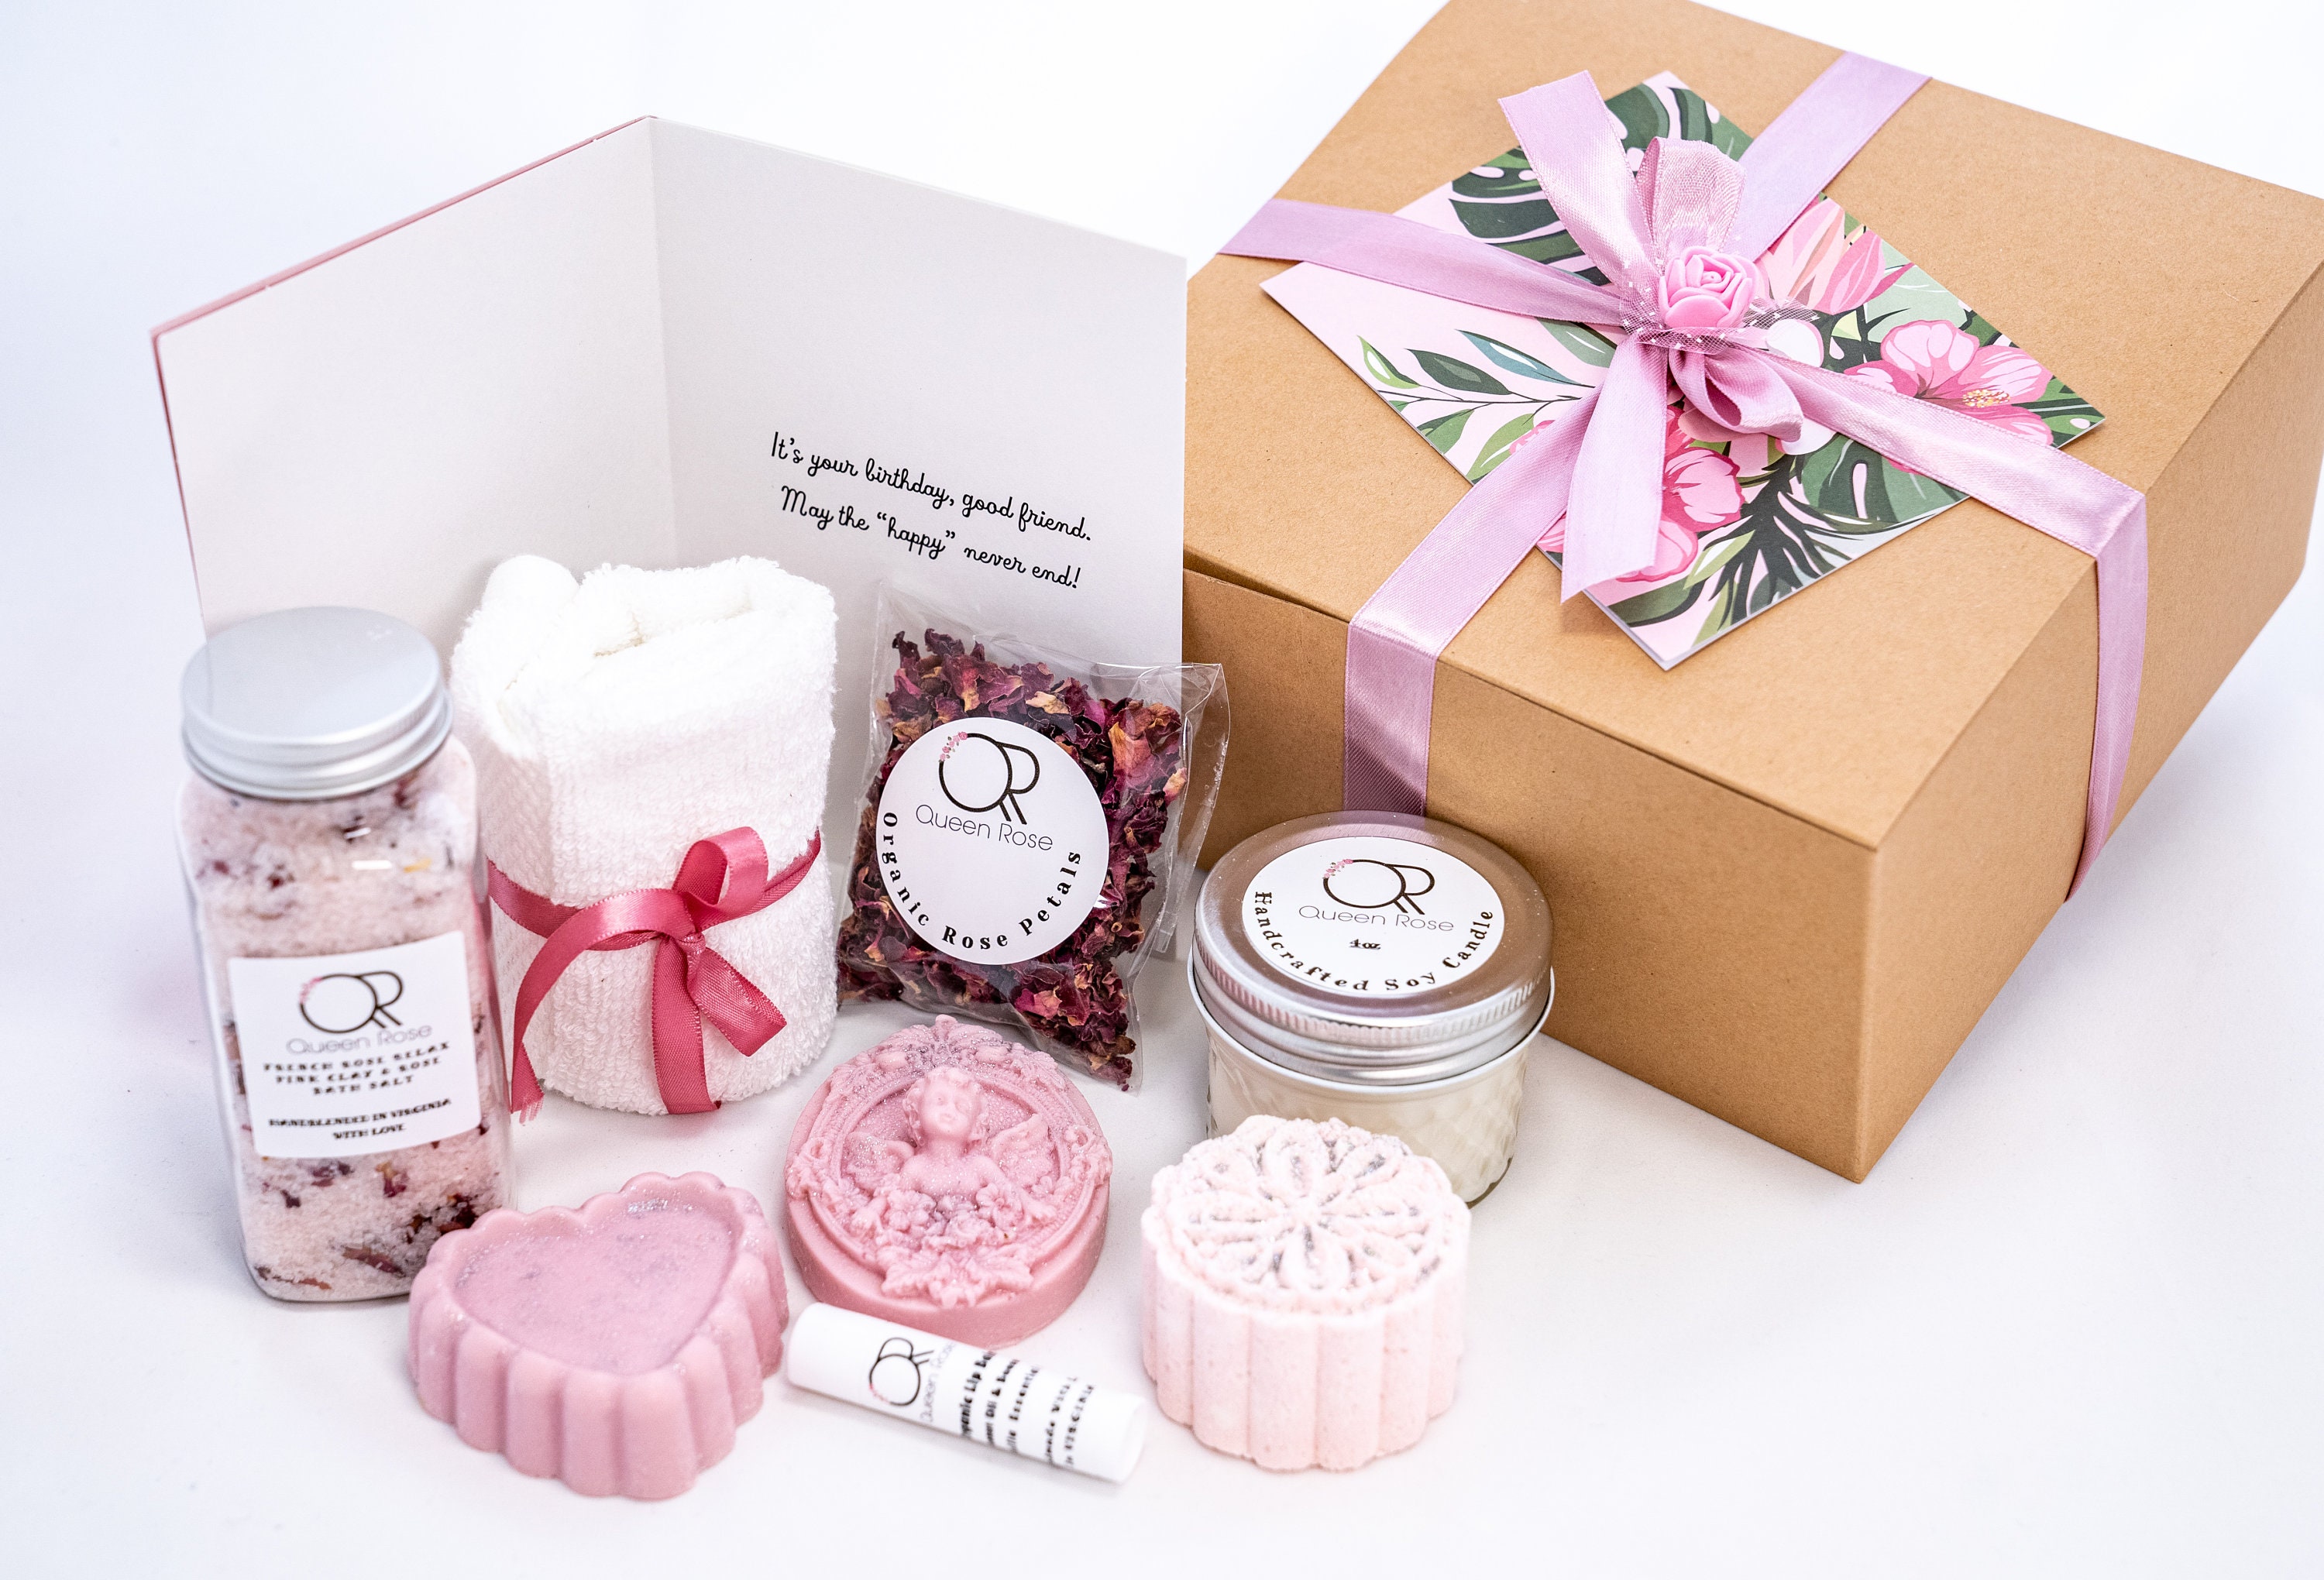  PULOTE Mother's Day Gifts for Mom - Relaxing Spa Gift Box For  Wife, Mom, Sister, Best Friend - Unique Happy Birthday Bath Set Gift Ideas  - Gift Boxes For Women 